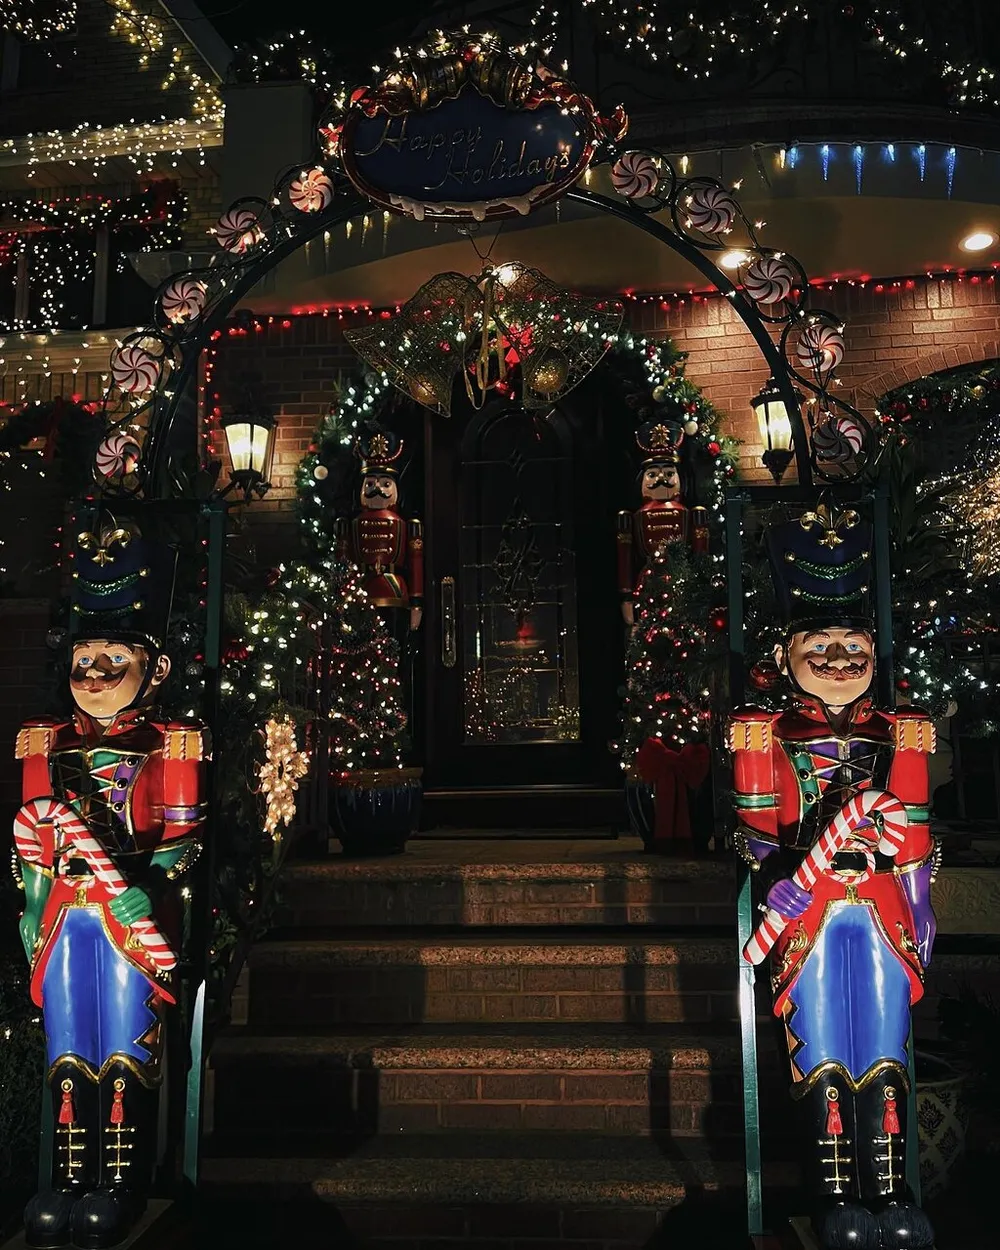 The image shows a festive holiday decoration with lit nutcracker statues flanking a staircase twinkling lights wreaths and a sign saying Happy Holidays